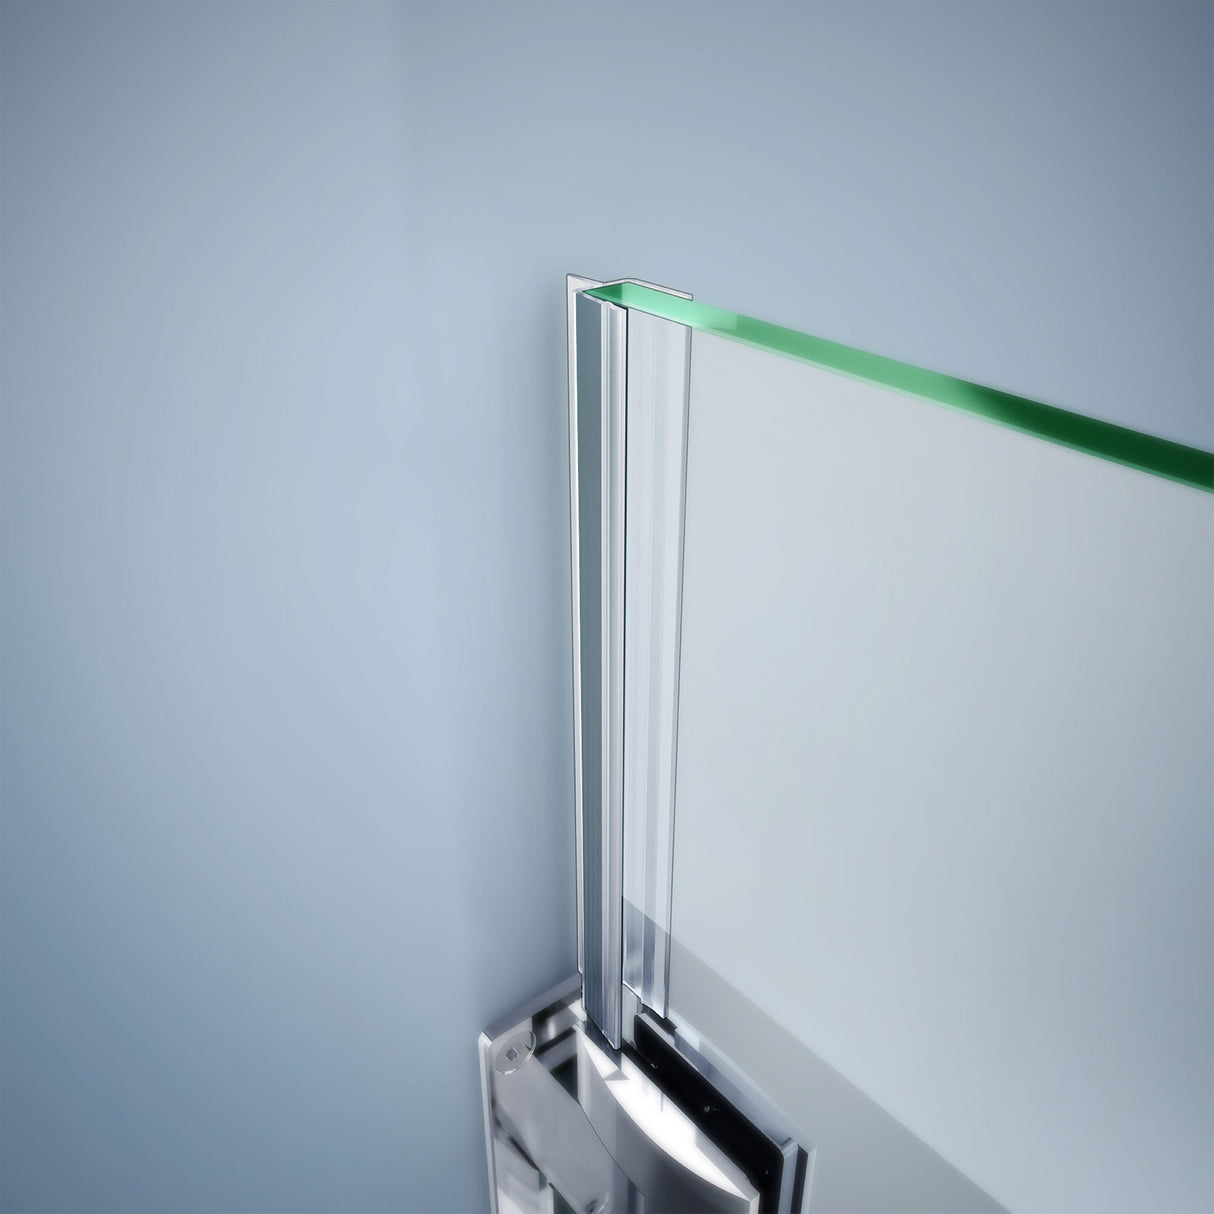 Clear Vinyl Seal with a Flexible Fin, 80 in. Length, for 3/8 in. (10 mm.) Glass Shower Door